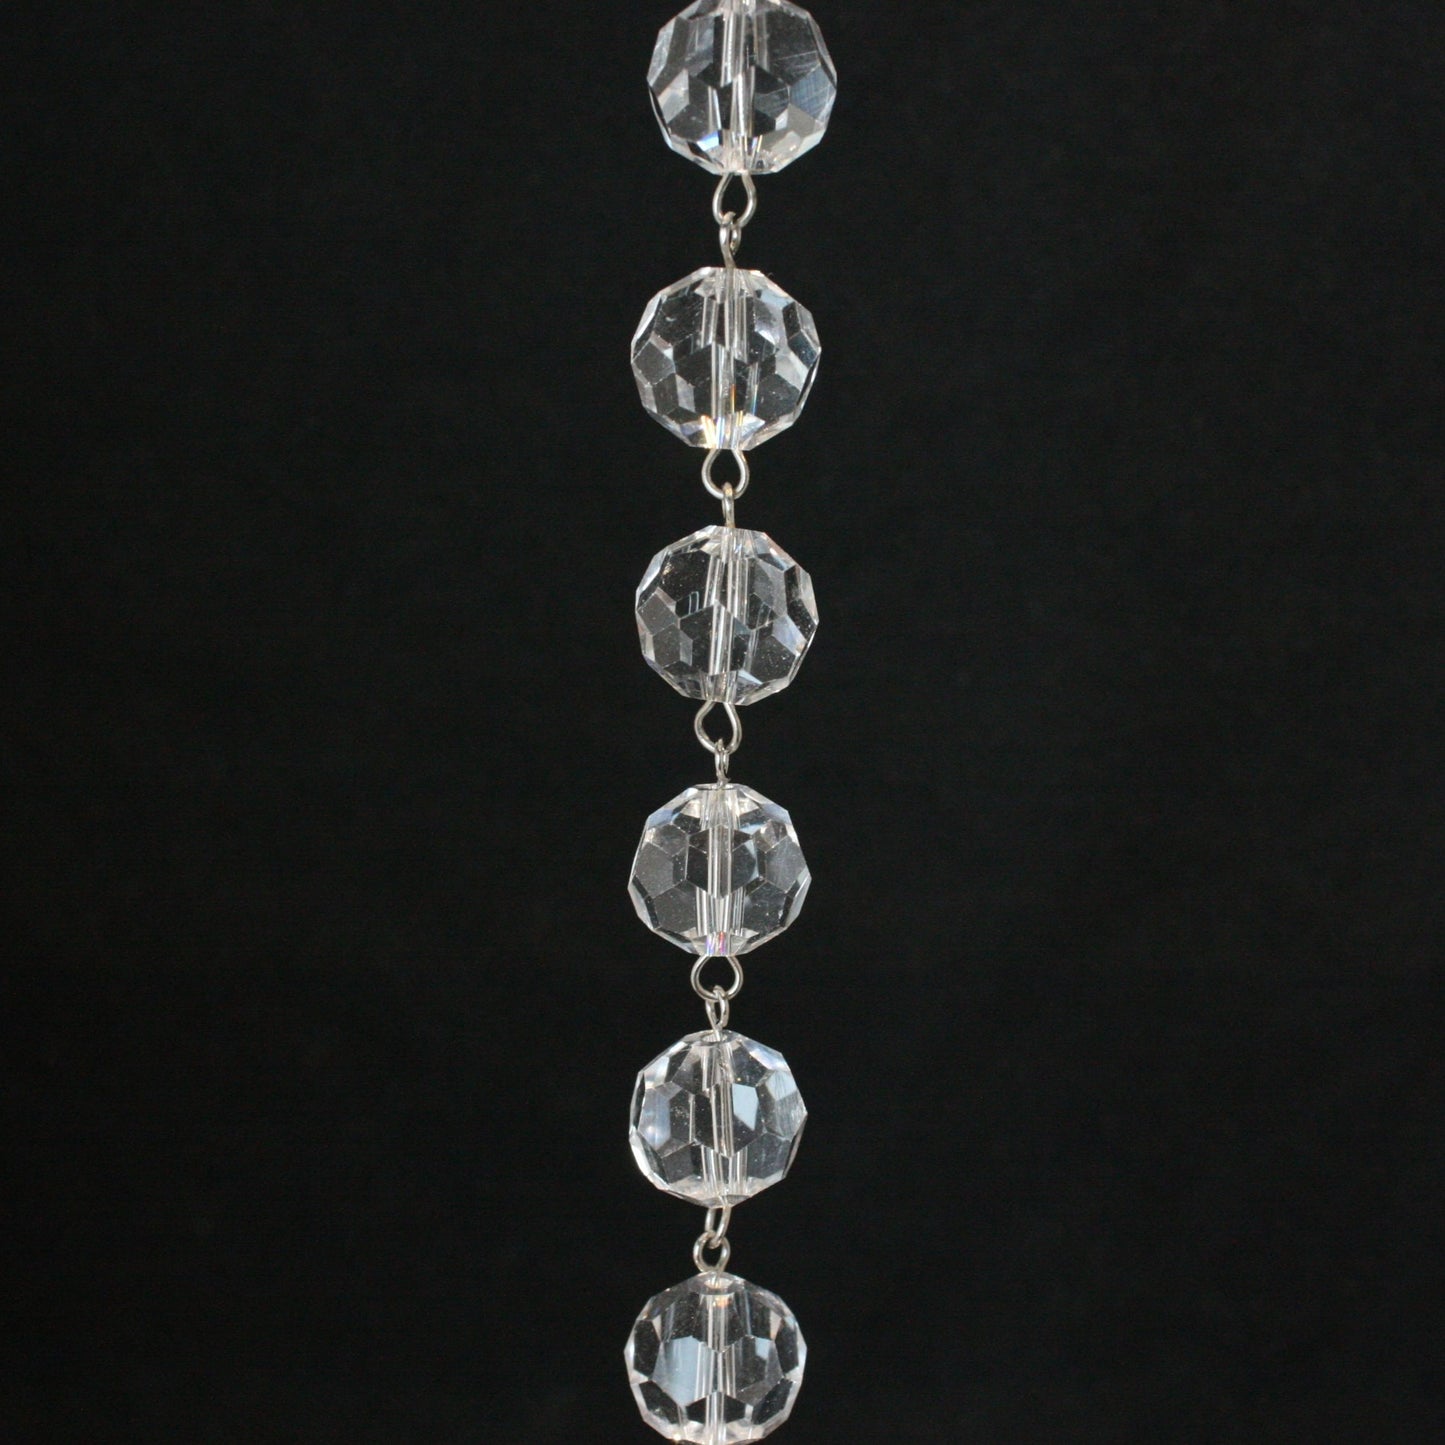 39" Clear Faceted Round Bead Chain